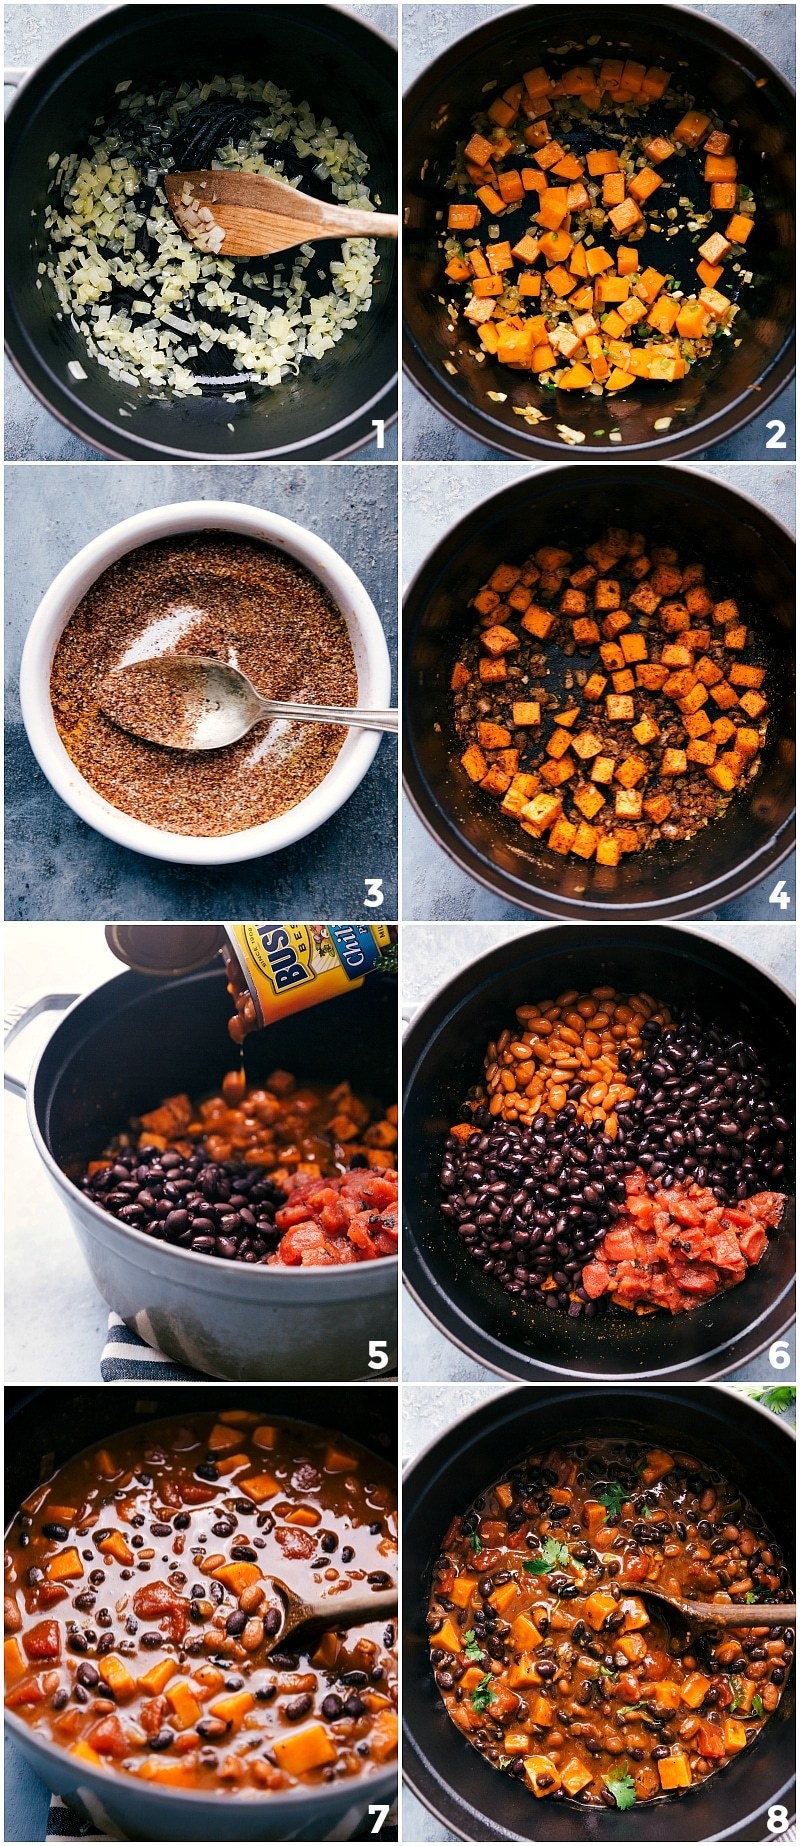 Beans stewing in a pot